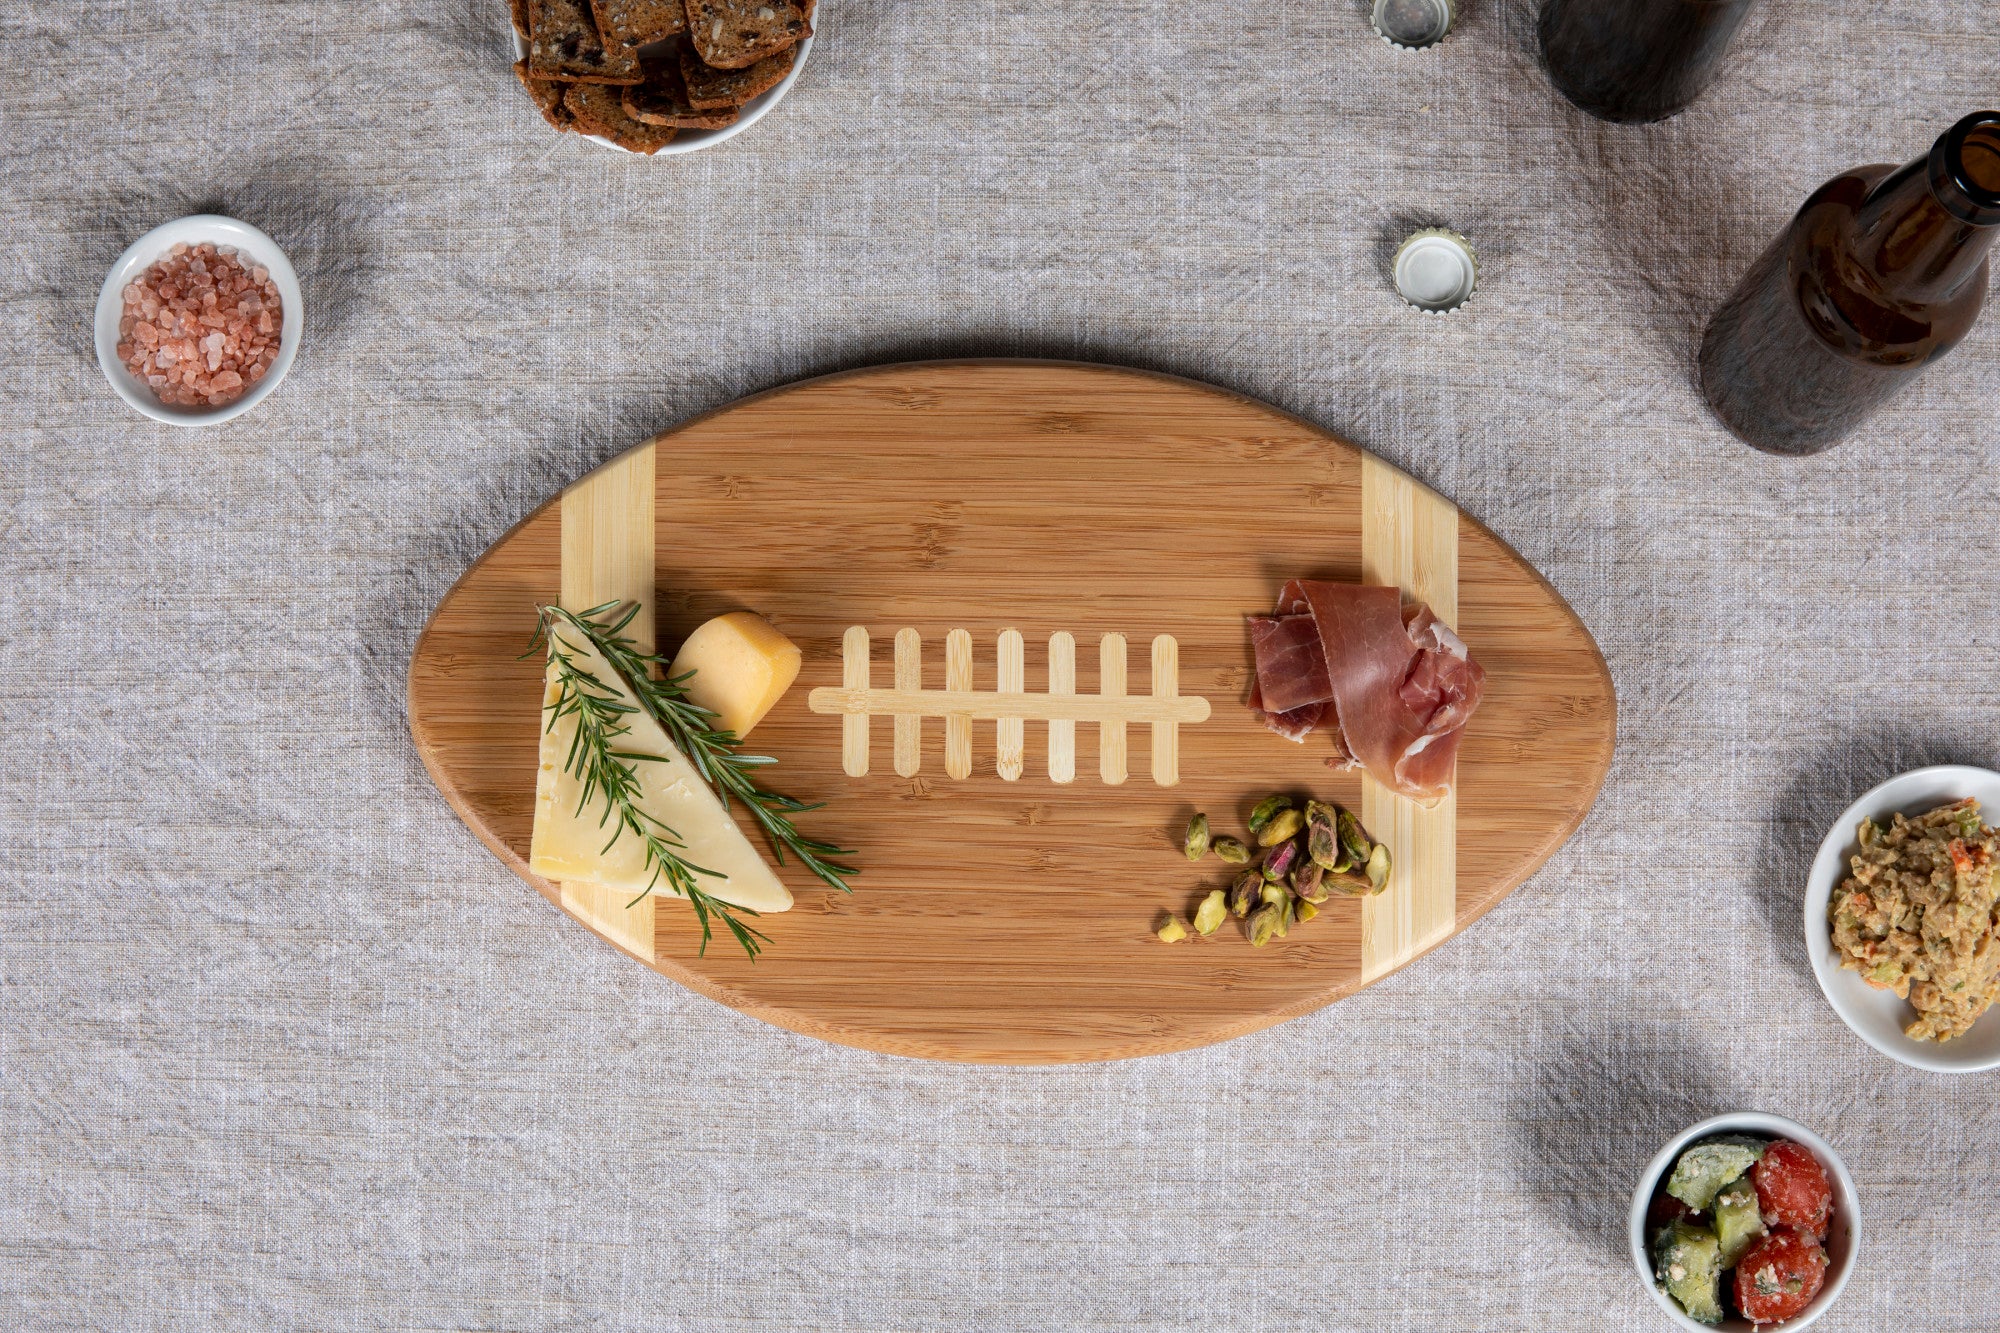 Tennessee Volunteers - Touchdown! Football Cutting Board & Serving Tray